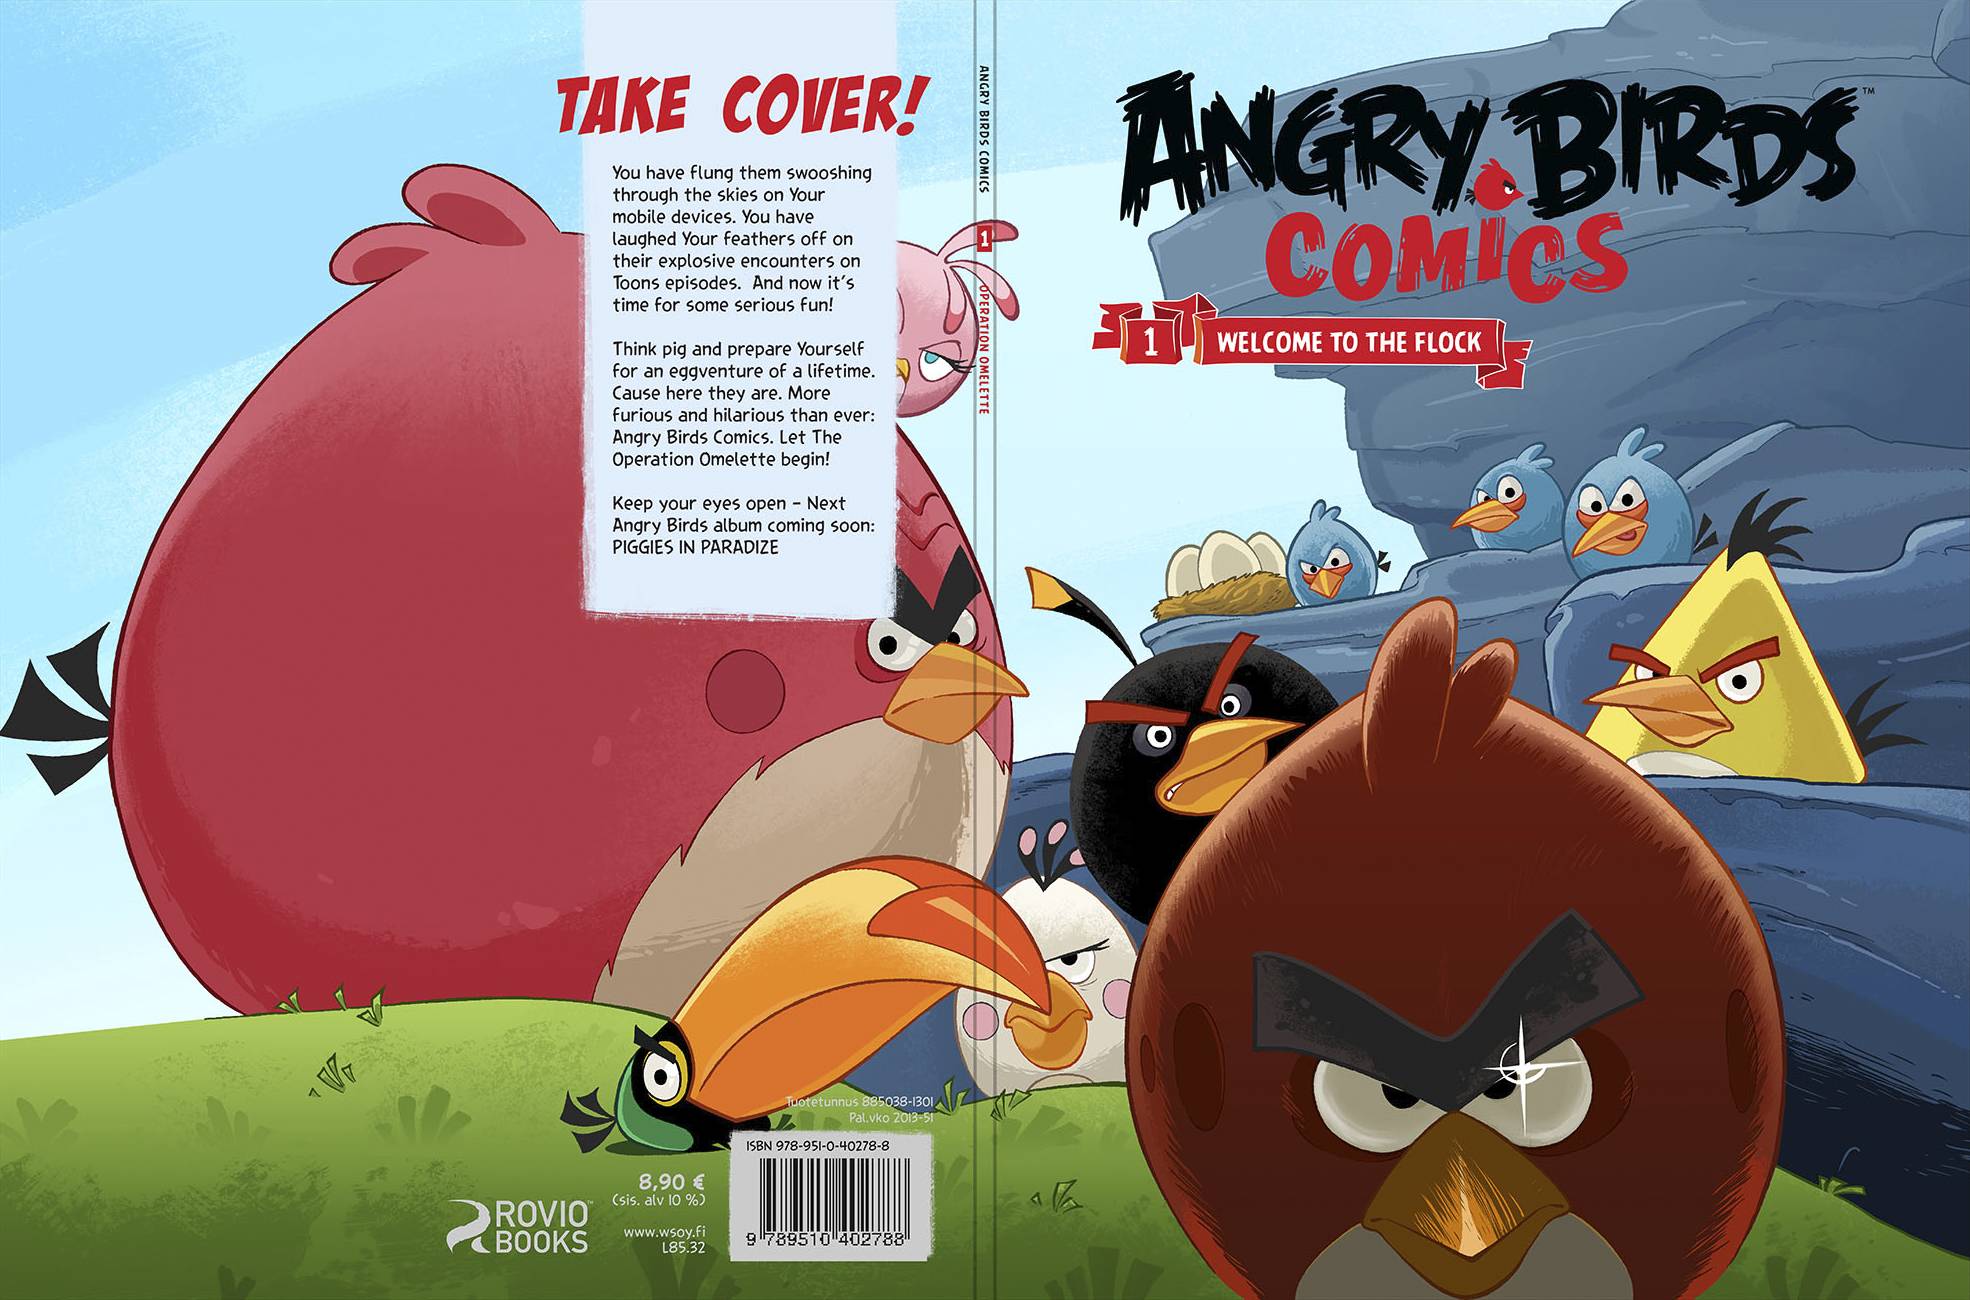 Angry Birds Comics Hardcover Volume 1 Welcome To the Flock